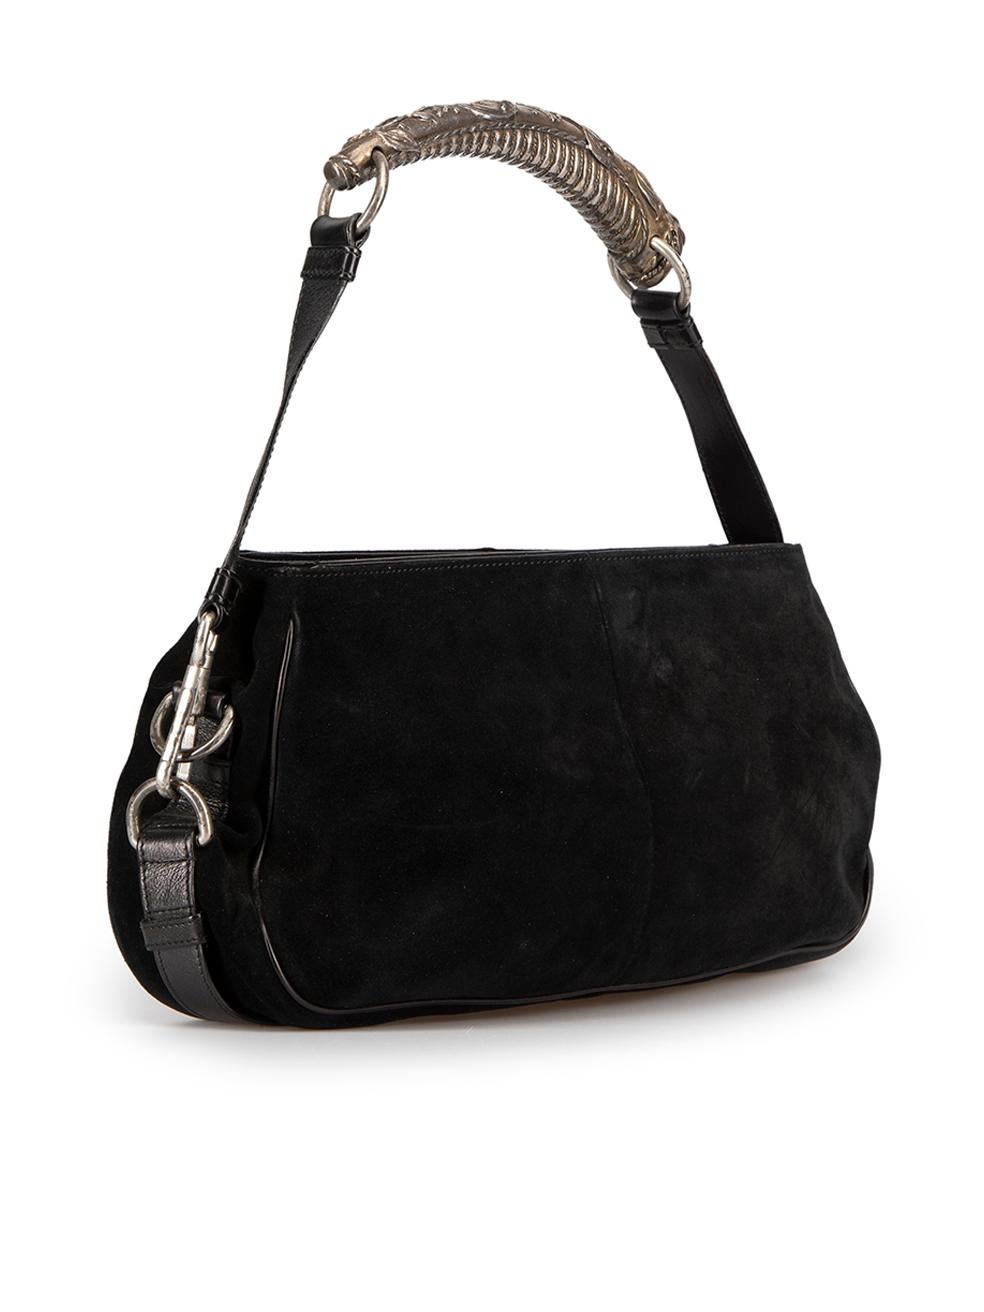 CONDITION is Good. General wear to handbag is evident. Moderate signs of wear to the suede and tarnishing along hardware on this used Yves Saint Laurent designer resale item.



Details


Black

Suede

Medium shoulder bag

Silver tone hardware

Horn